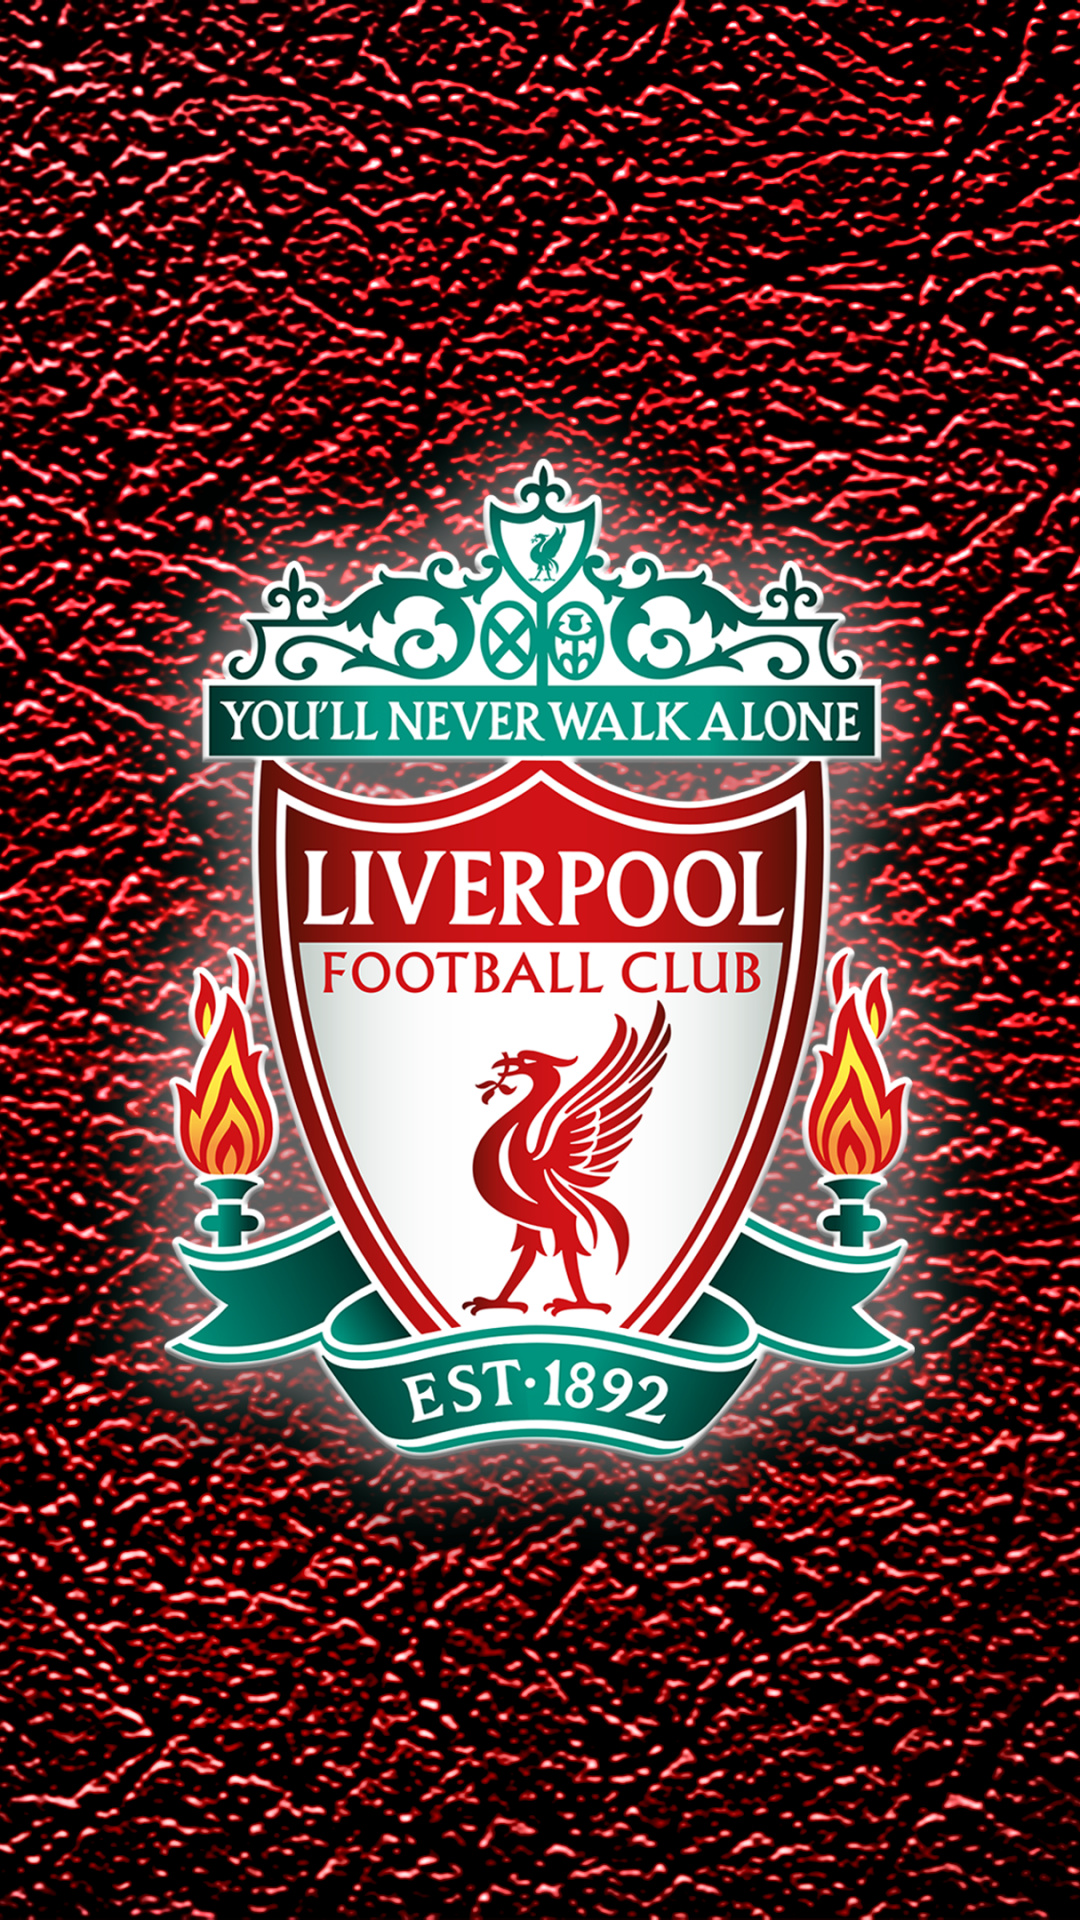 Liverpool Football Club: LFC has long-standing rivalries with Manchester United and Everton. 1080x1920 Full HD Background.